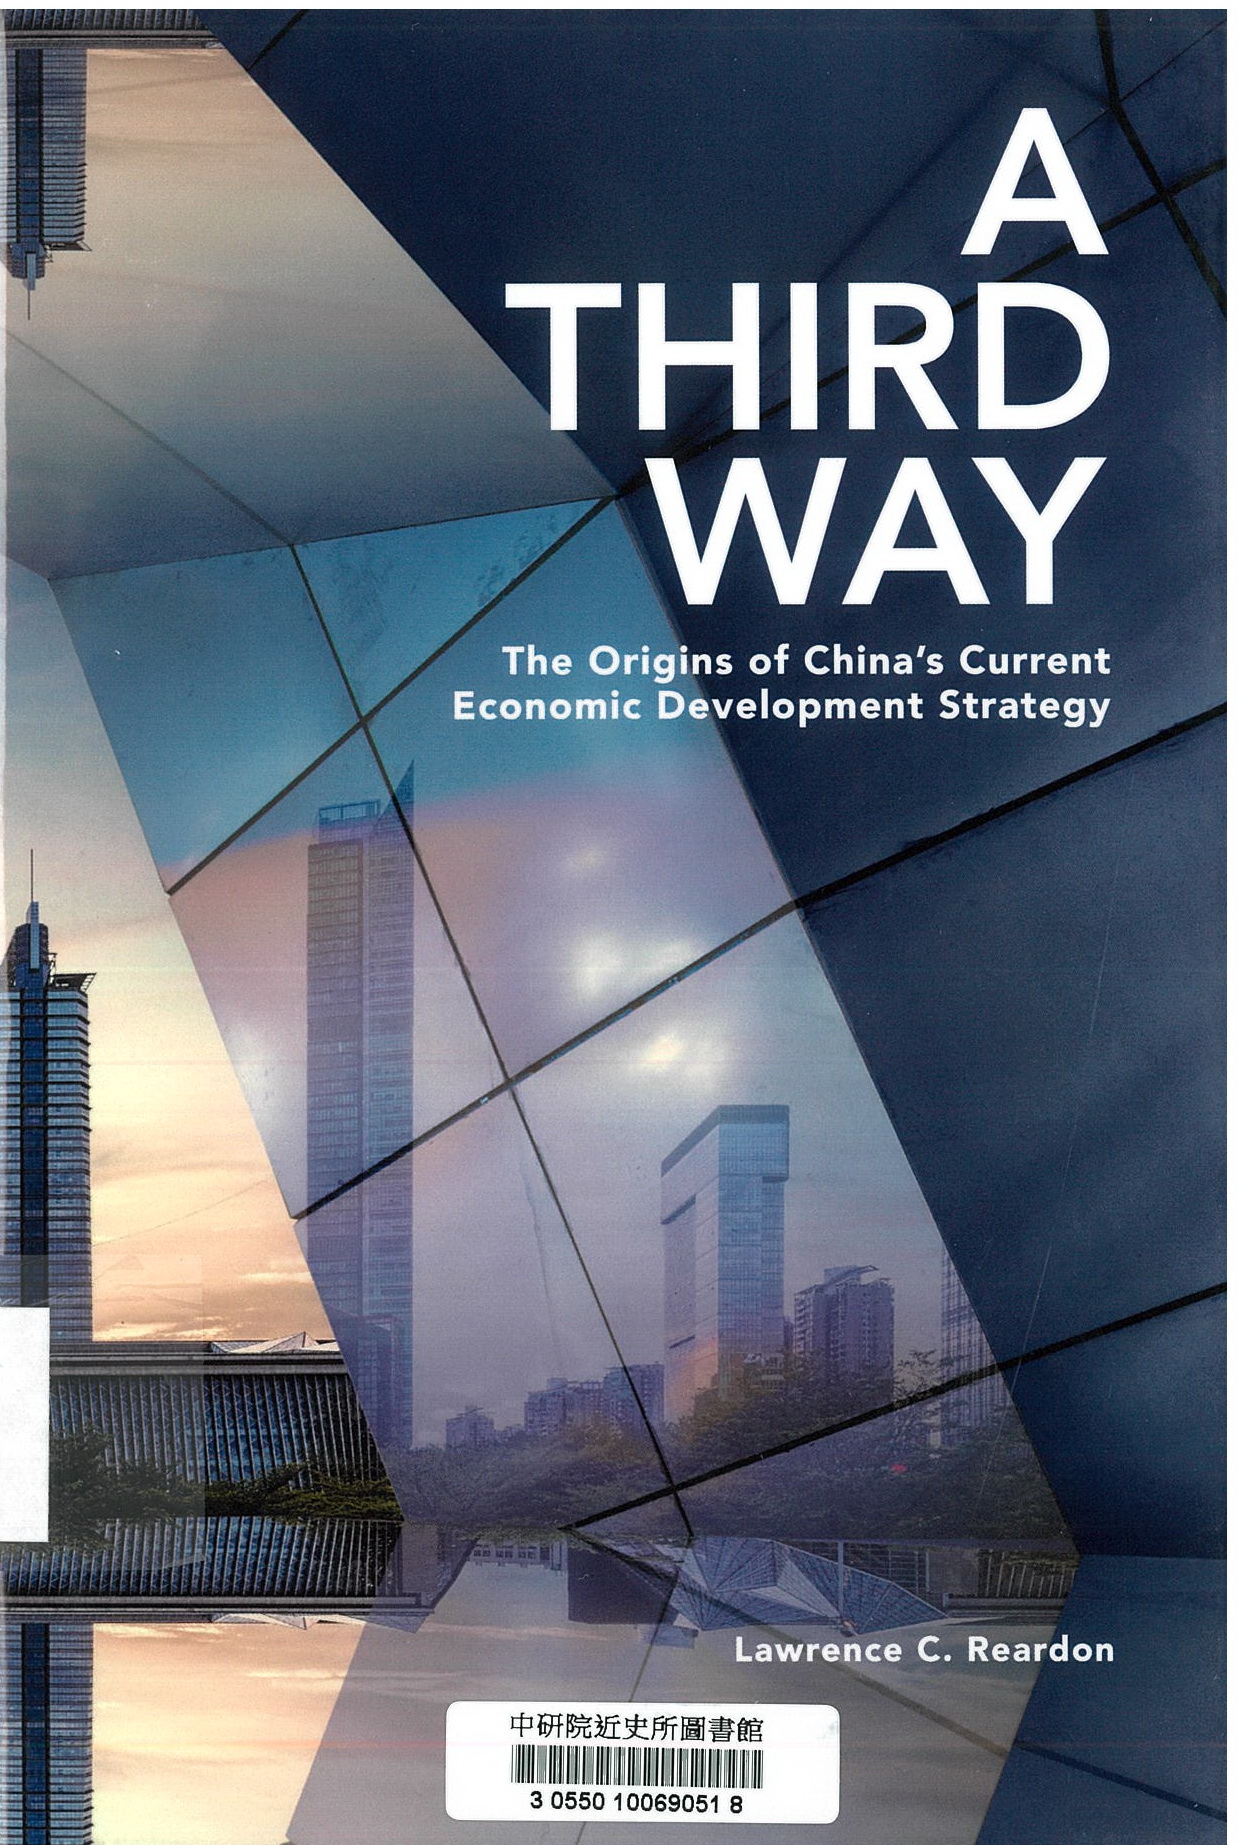 A third way : the origins of China's current economic development strategy